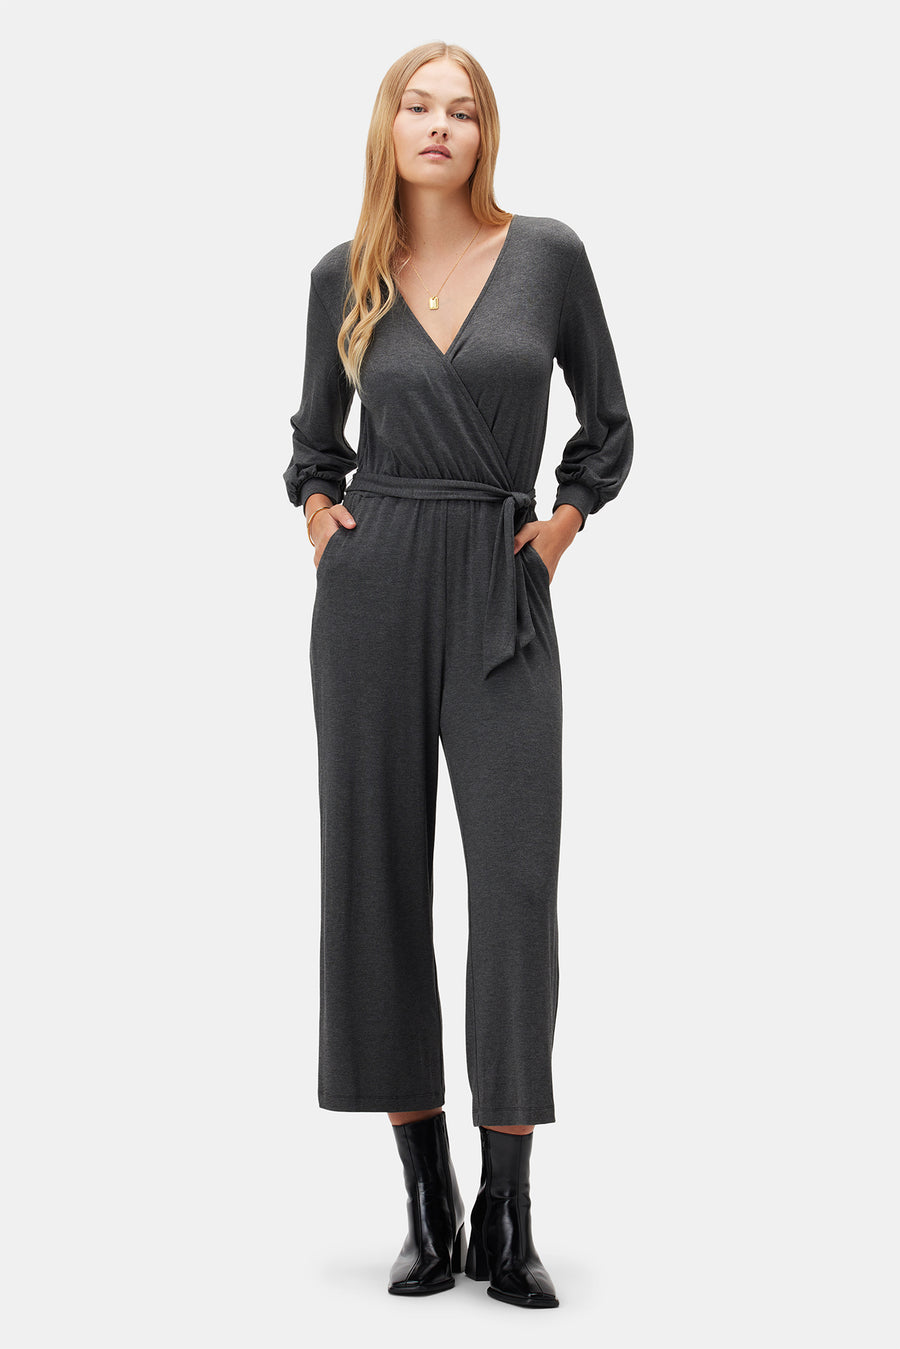 Everley Modal Jumpsuit - Anthracite